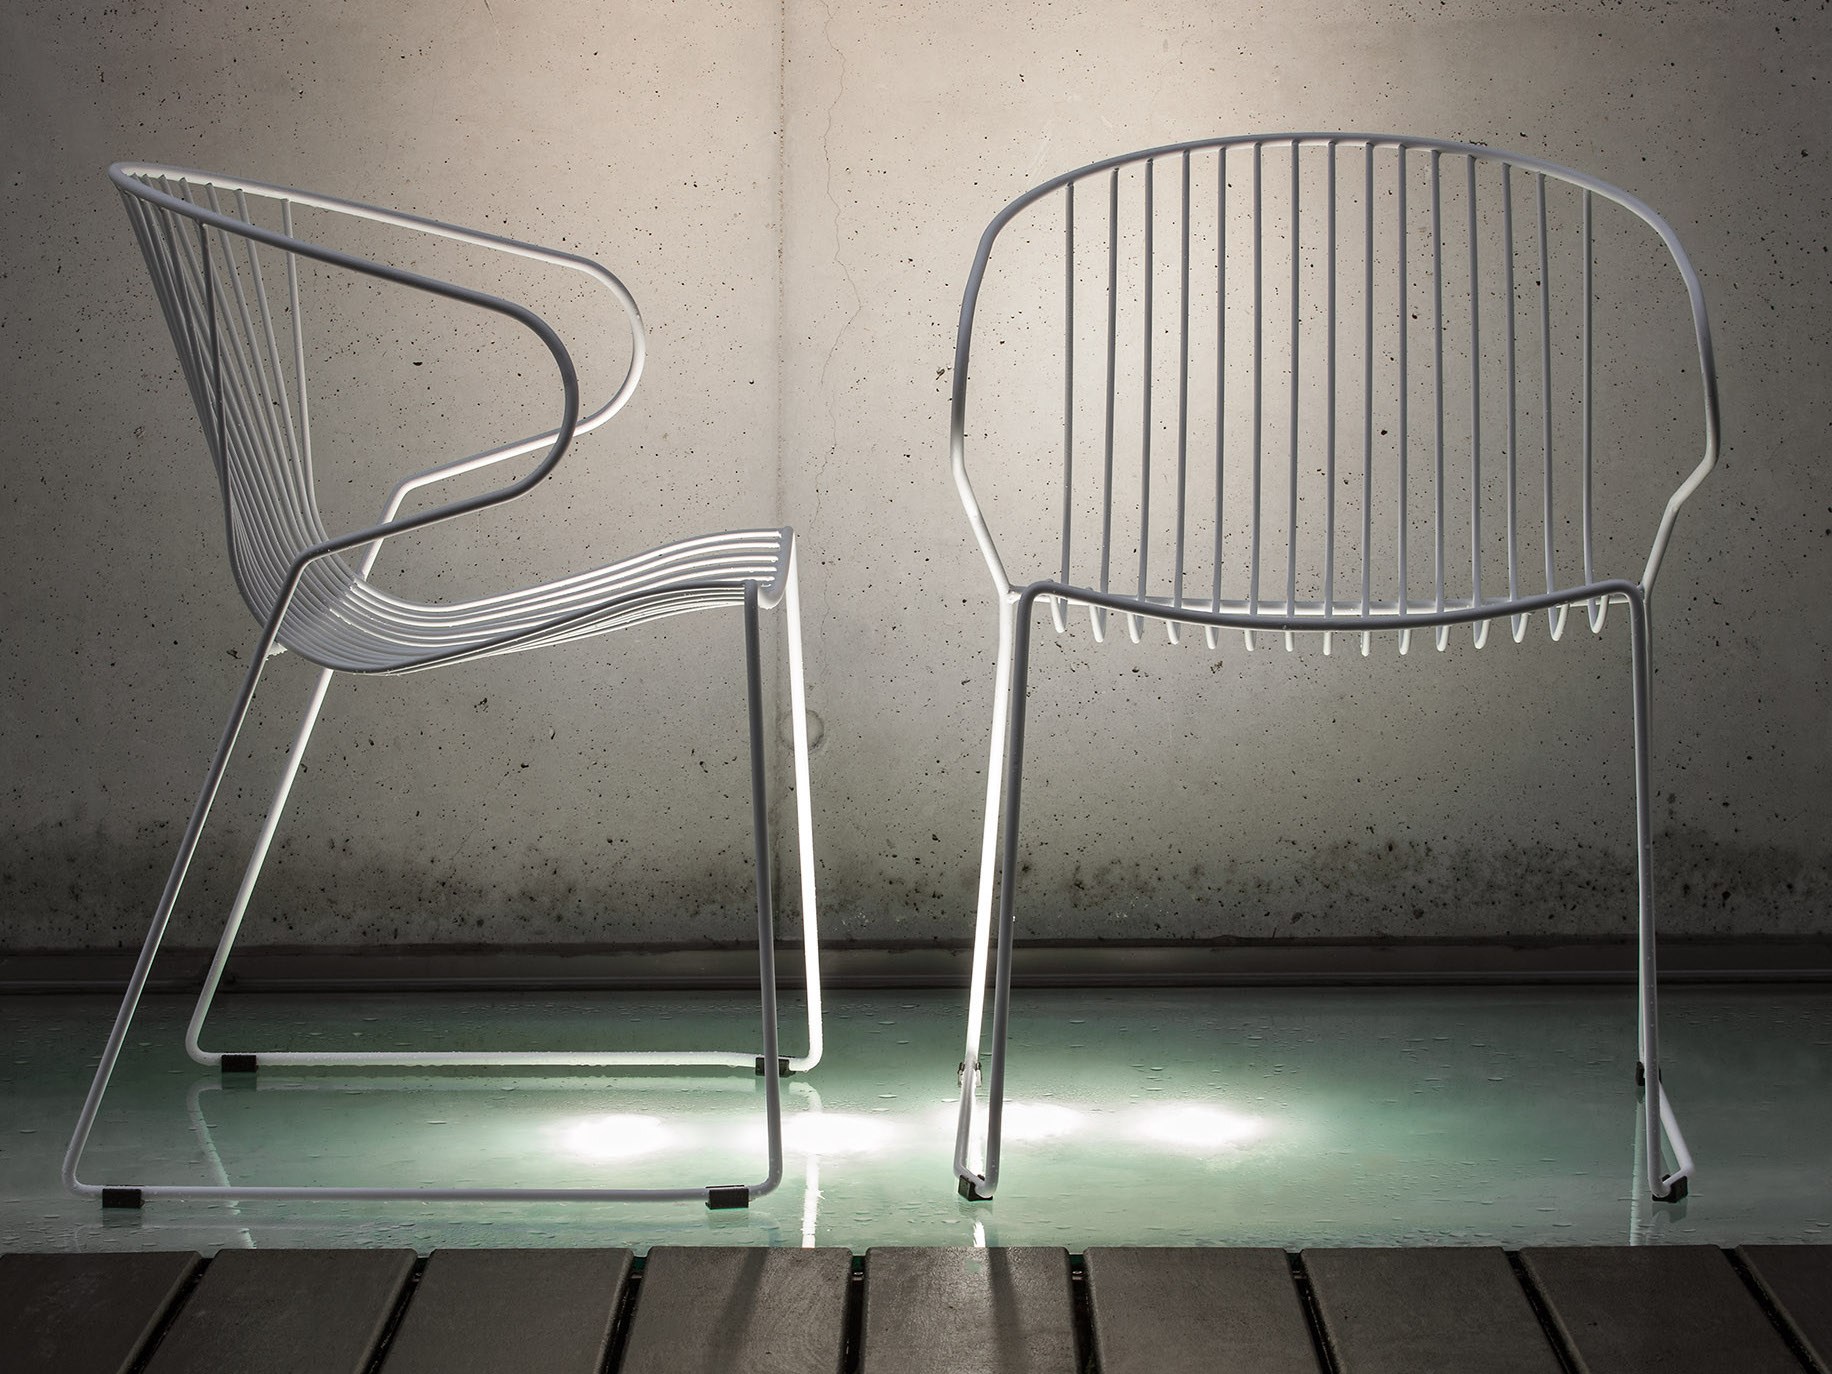 A light, refined design for indoor and outdoor use: the BOLONIA chair, iSi mar